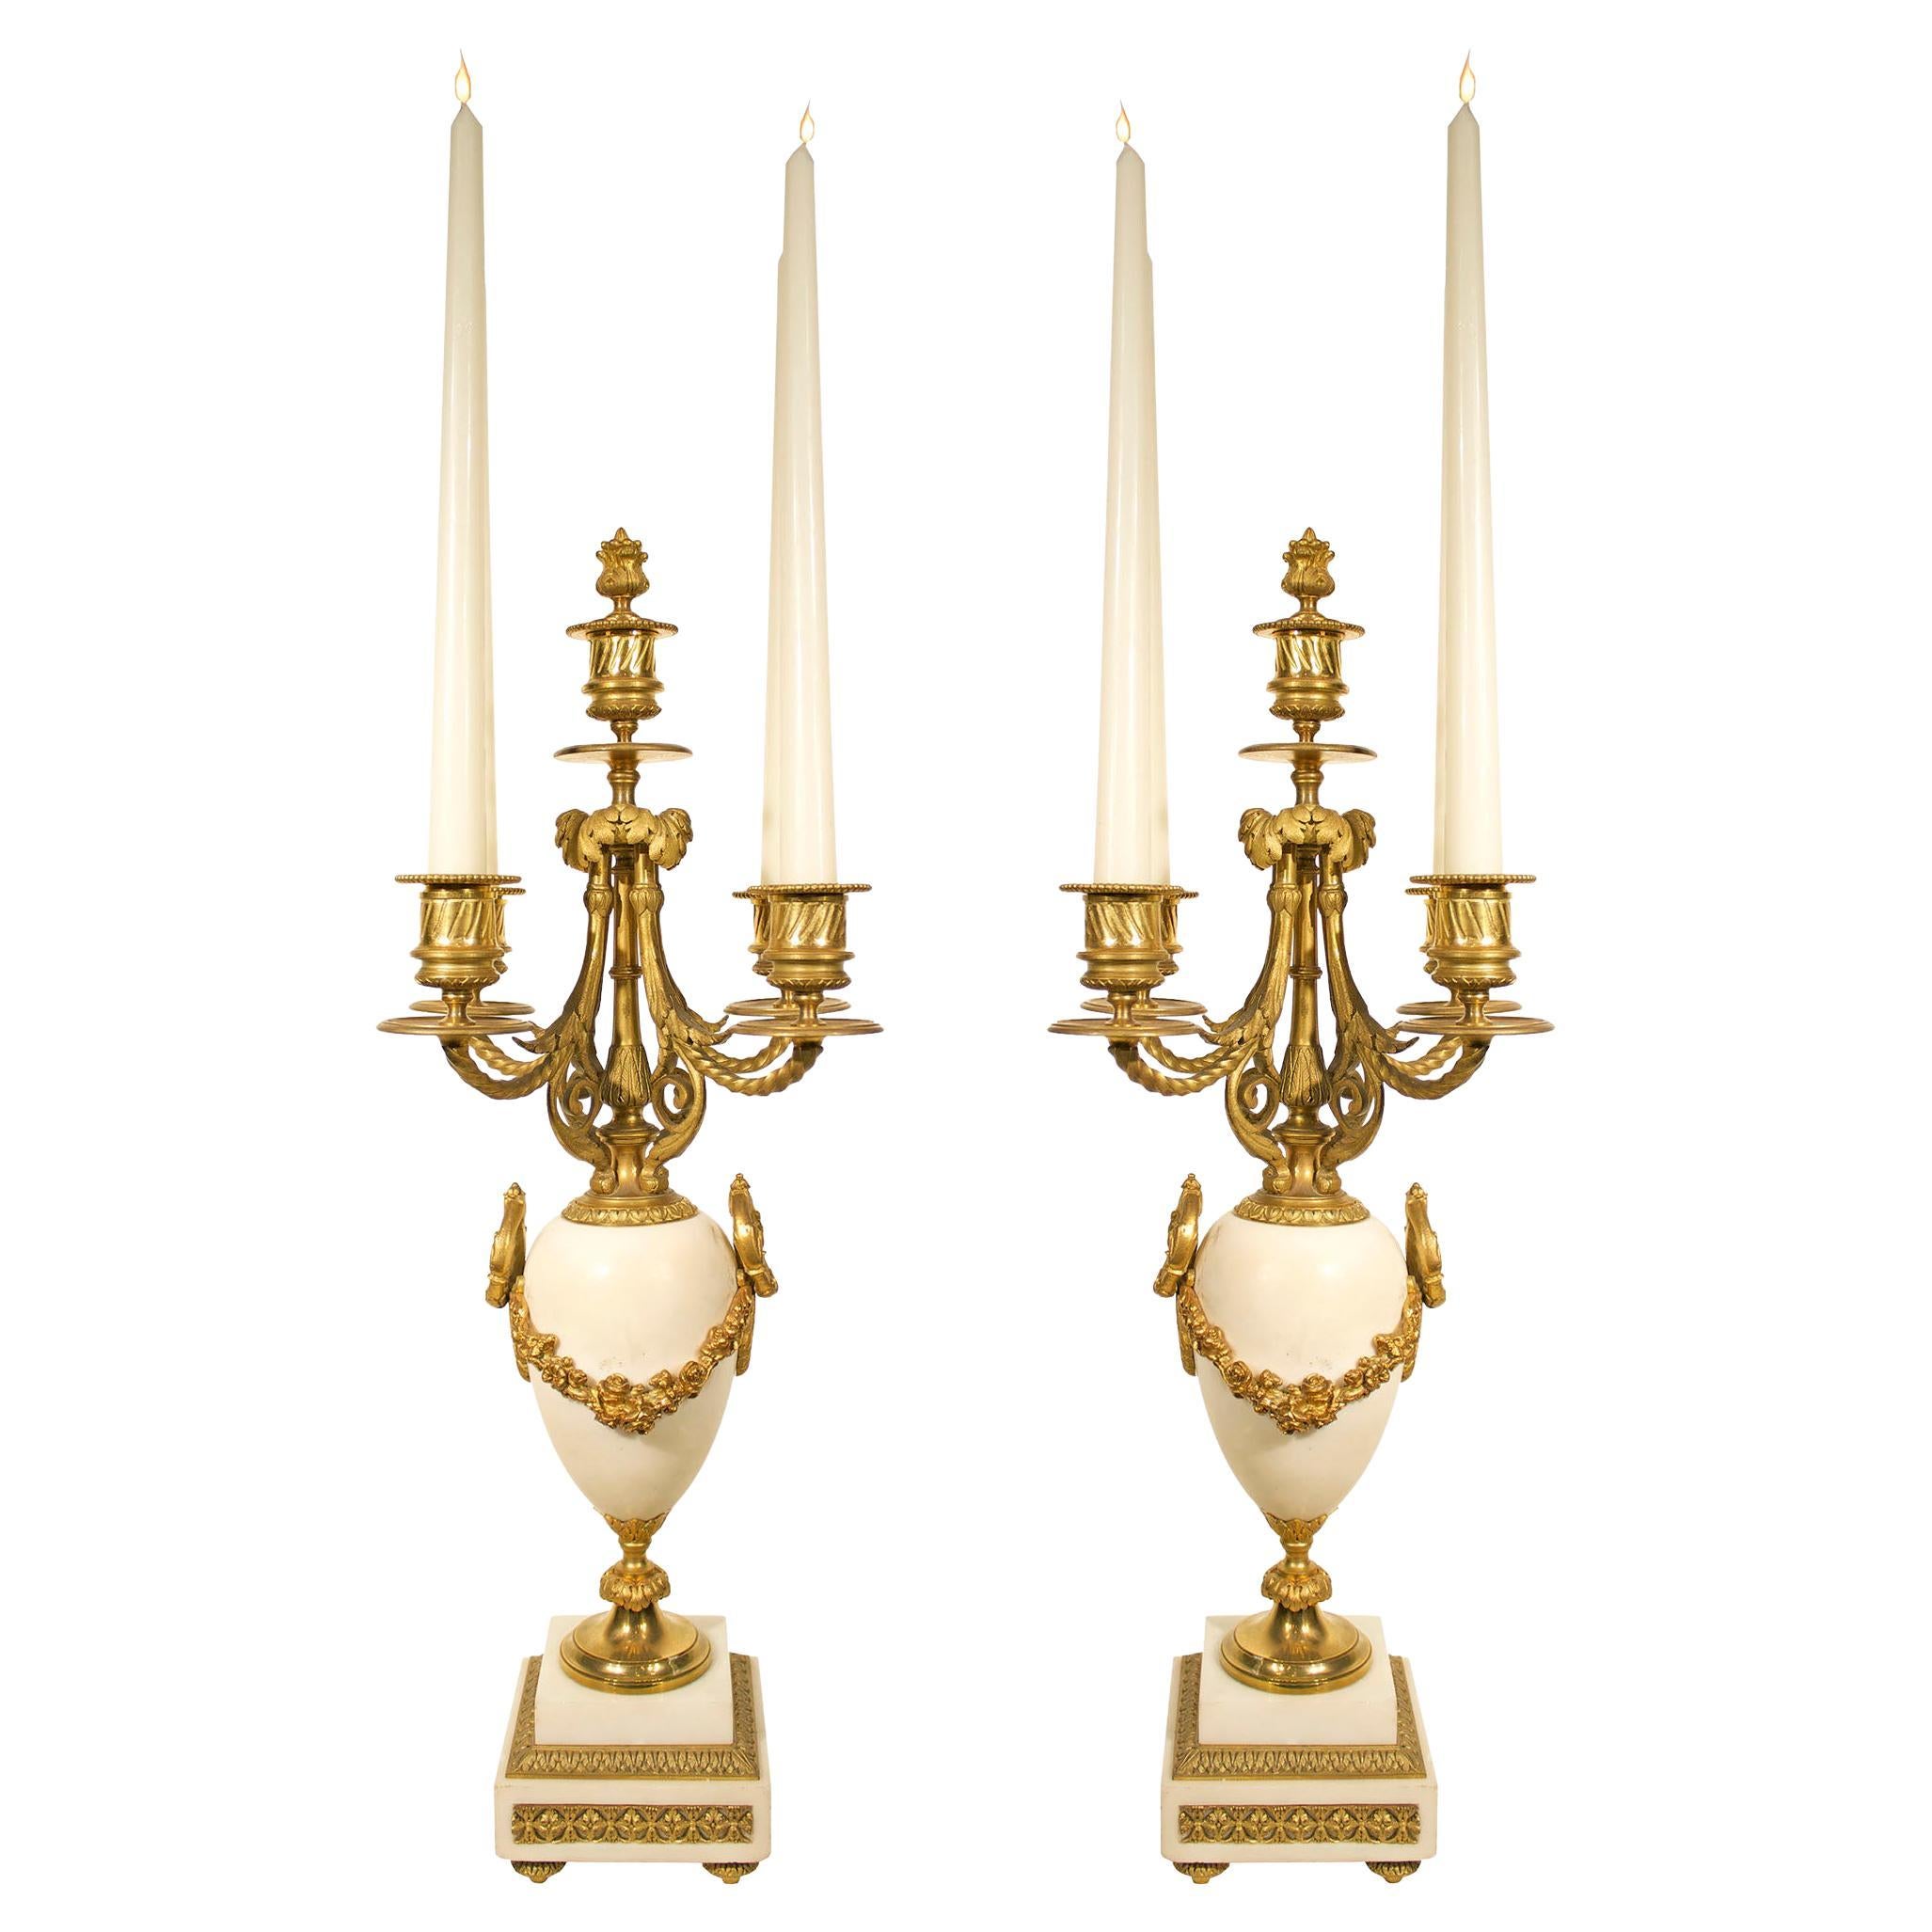 Pair of French Mid-19th Century Louis XVI Style Marble and Ormolu Candelabras